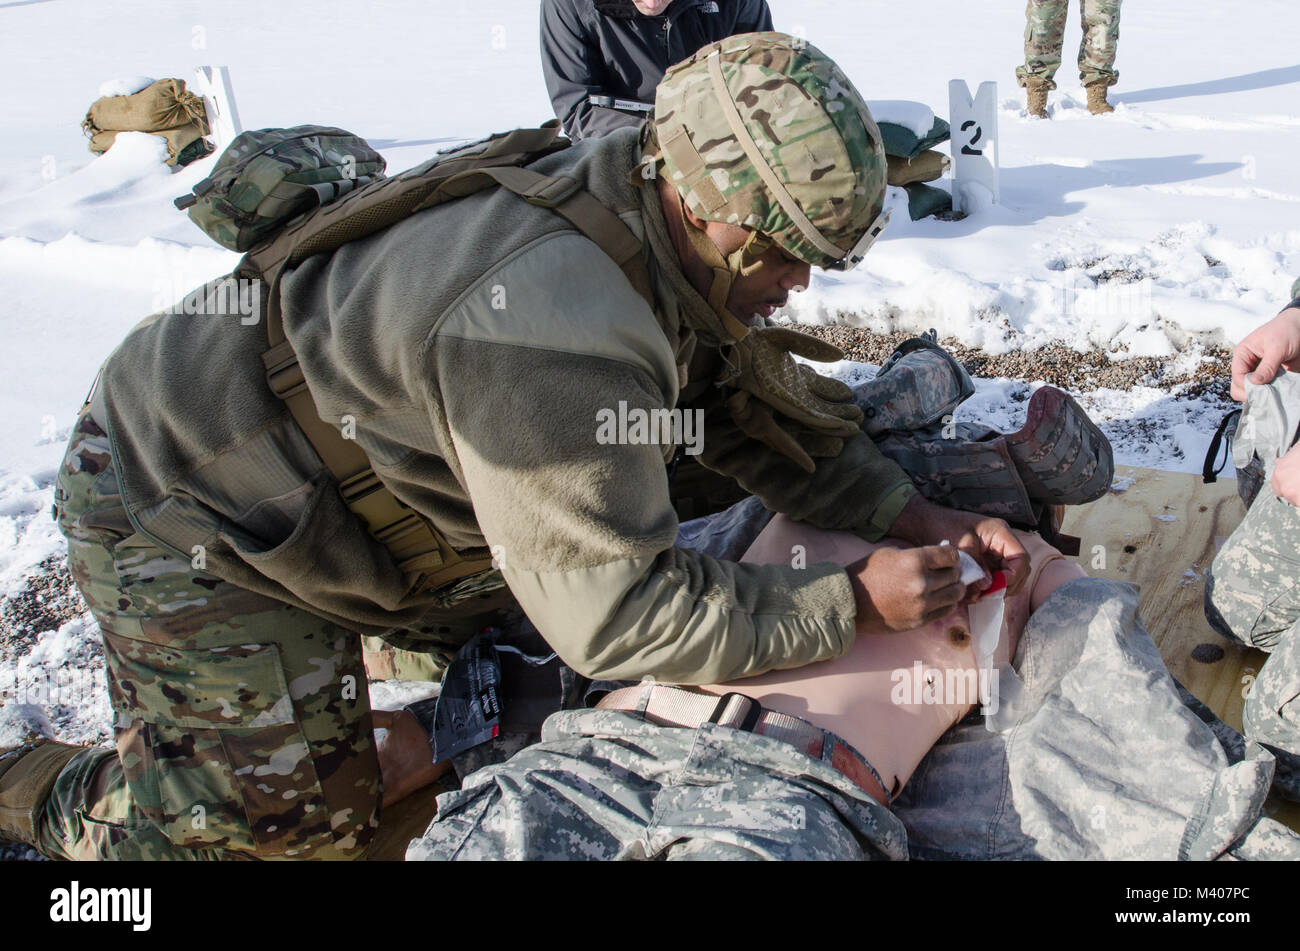 FORT MCCOY, Wis. - U.S. Army Reserve Staff Sgt. Javar Manley, medic, Task Force Triad, Operation Cold Steel II, treats a sucking chest wound on an emergency patient simulator during a medical evacuation rehearsal at Fort McCoy, Wis., Feb. 8, 2018. Operation Cold Steel is the U.S. Army Reserve’s crew-served weapons qualification and validation exercise to ensure America’s Army Reserve units and Soldiers are trained and ready to deploy on short-notice as part of Ready Force X and bring combat-ready and lethal firepower in support of the Army and our joint partners anywhere in the world. (U.S. Ar Stock Photo